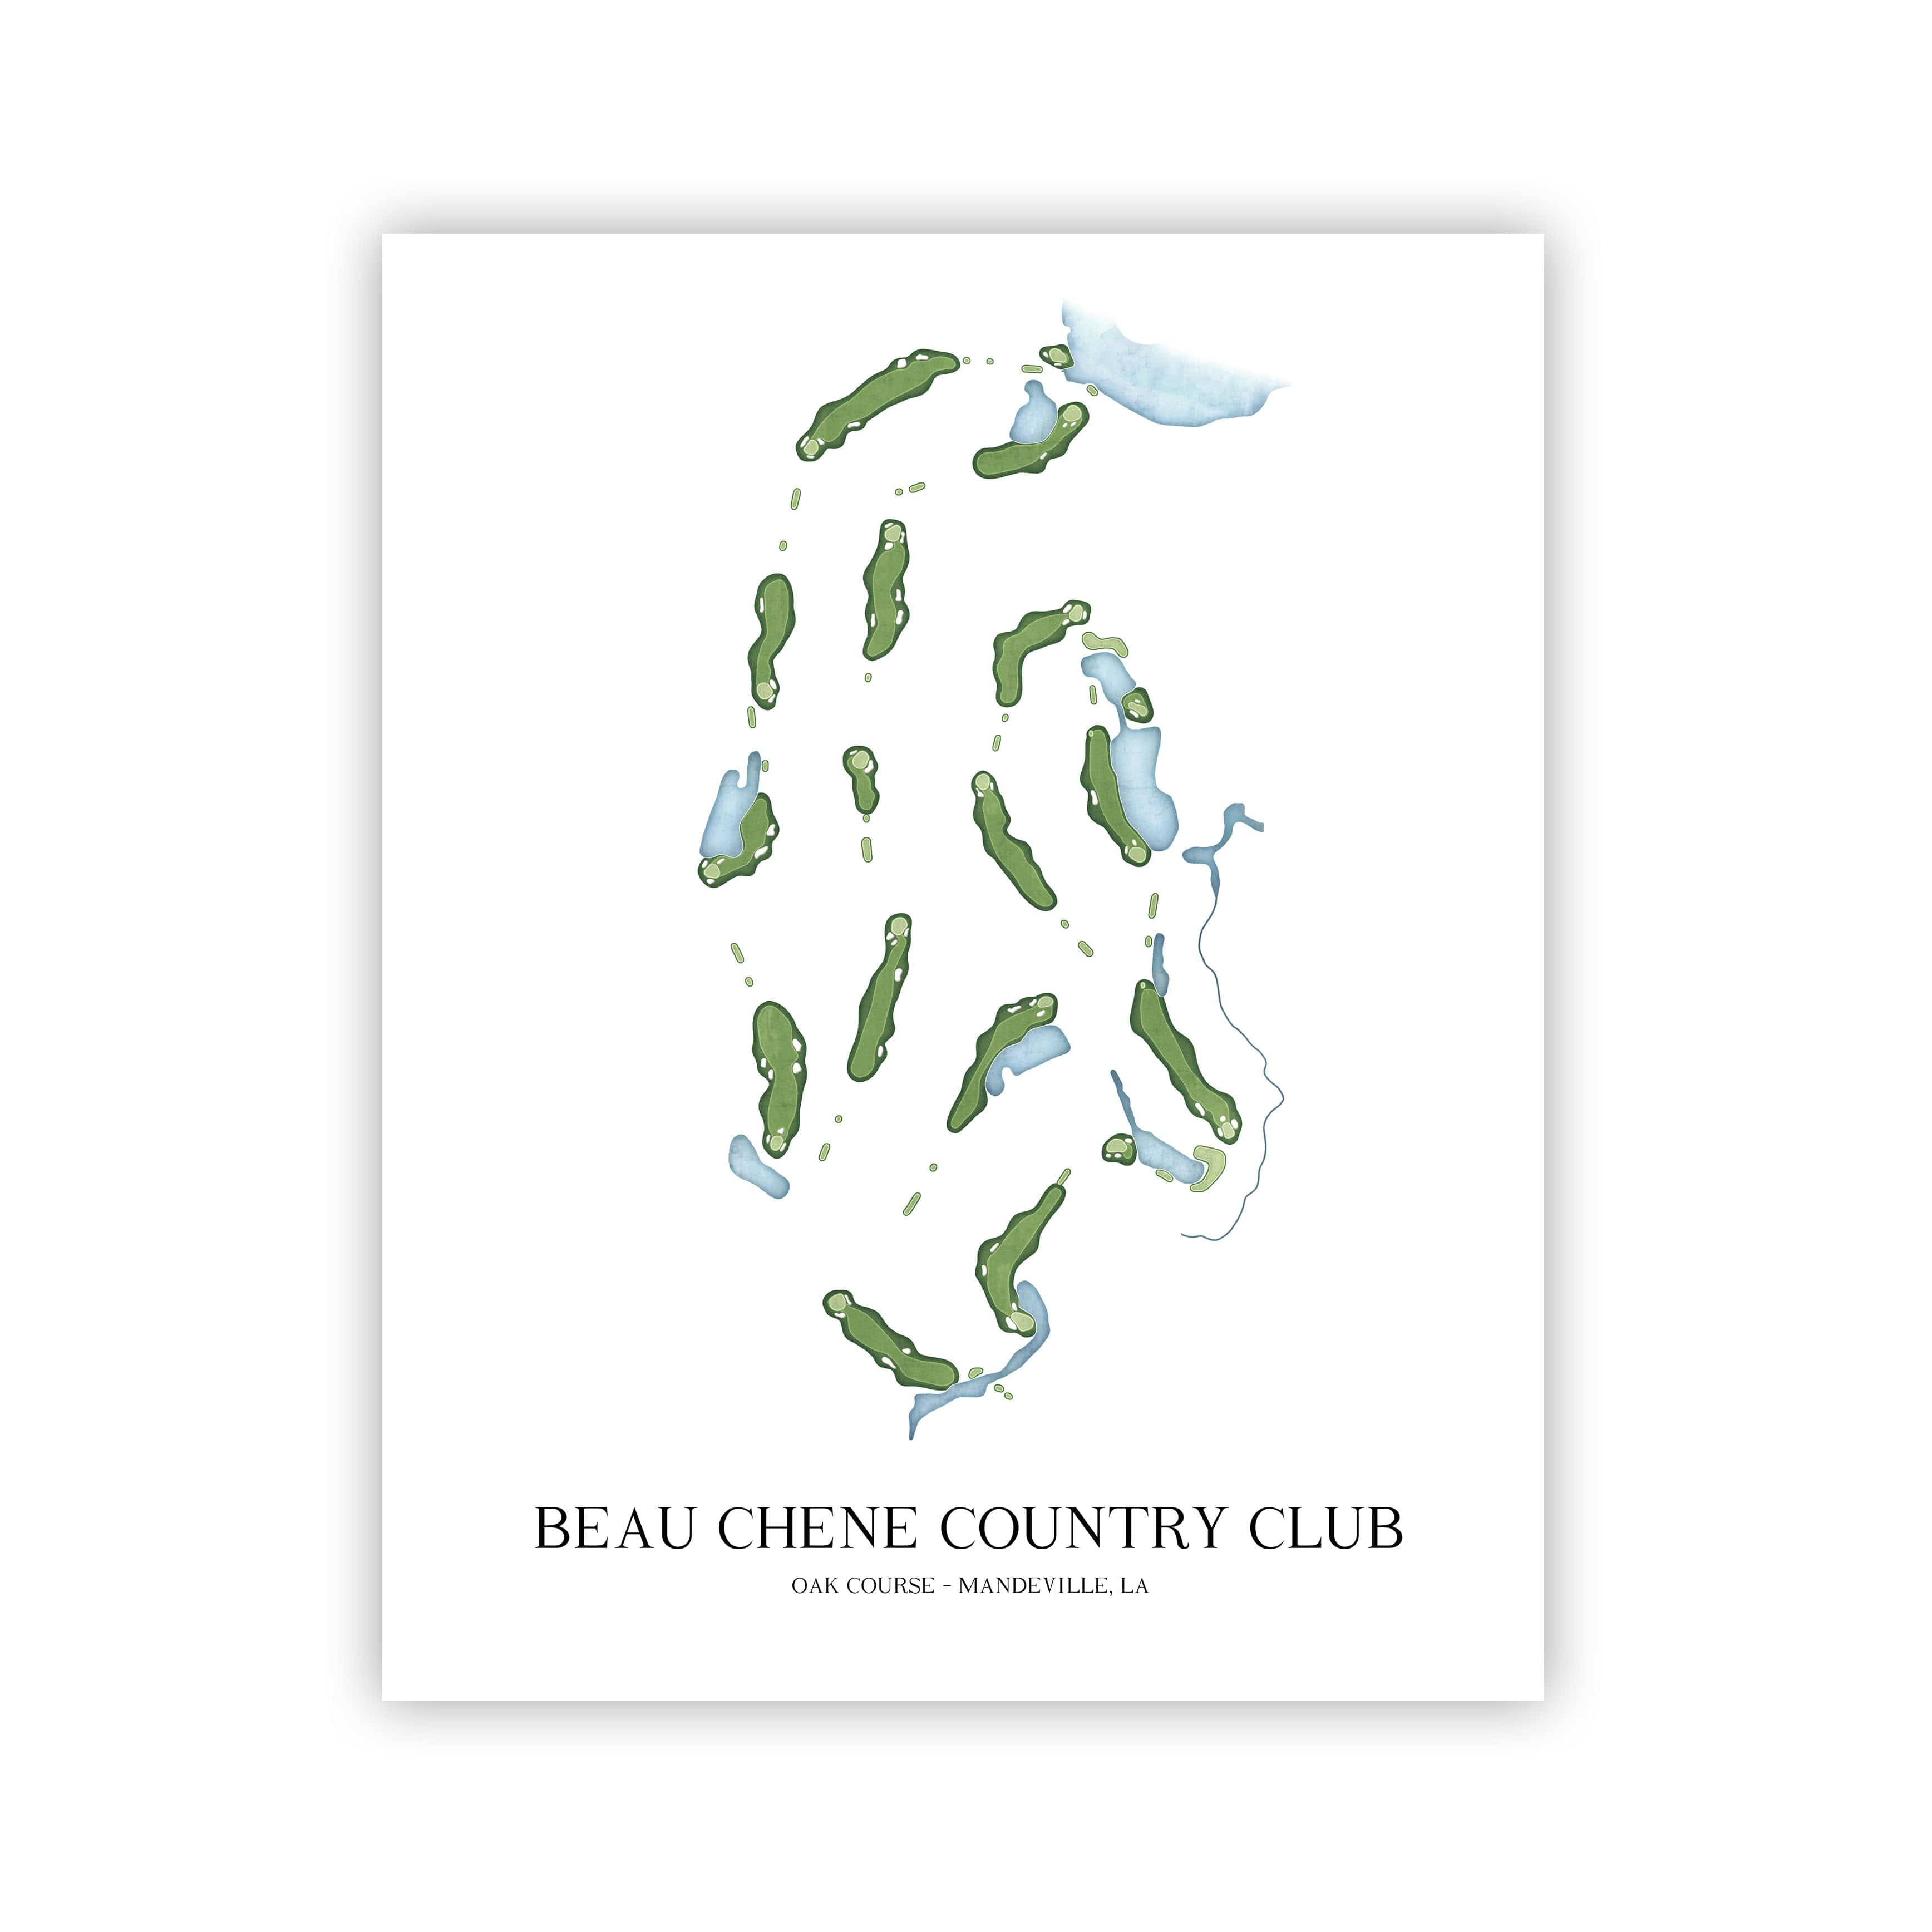 The 19th Hole Golf Shop - Golf Course Prints -  Beau Chene Country Club - Oak Golf Course Map